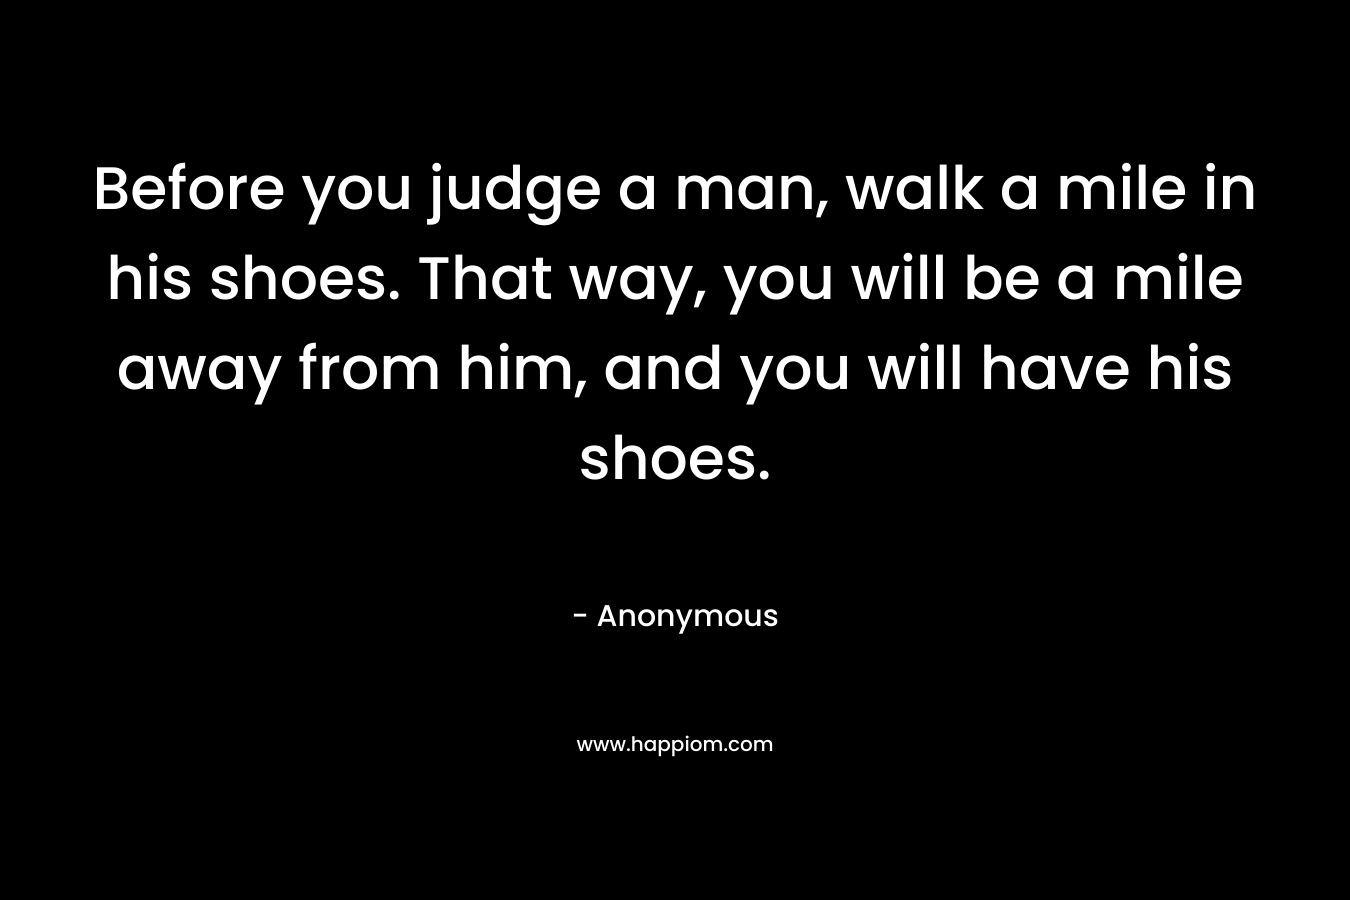 Before you judge a man, walk a mile in his shoes. That way, you will be a mile away from him, and you will have his shoes.